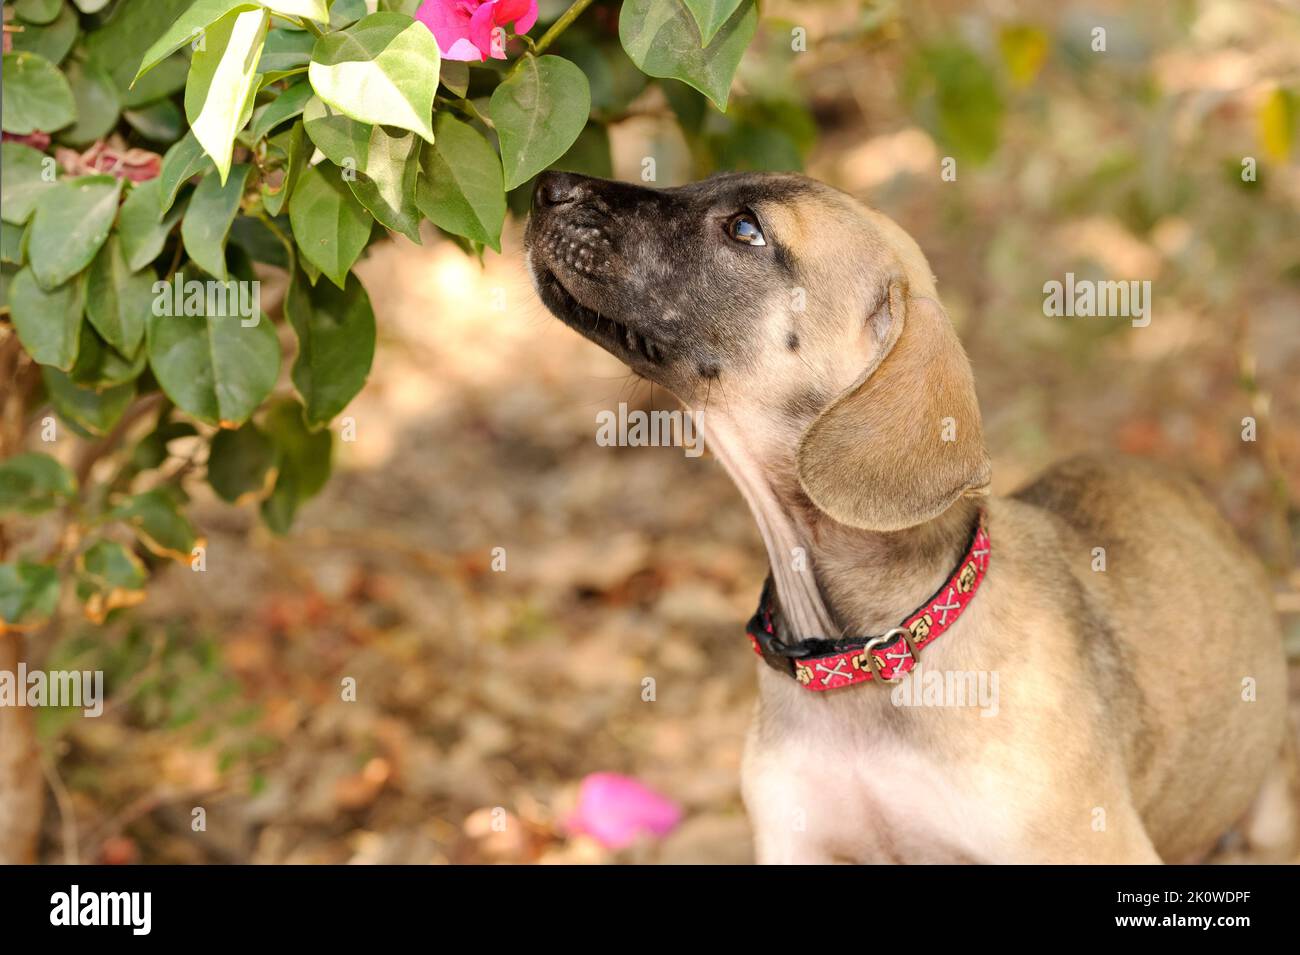 A Cute Adorable Puppy Dog Is Sniffing A Flower Outdoors Stock Photo